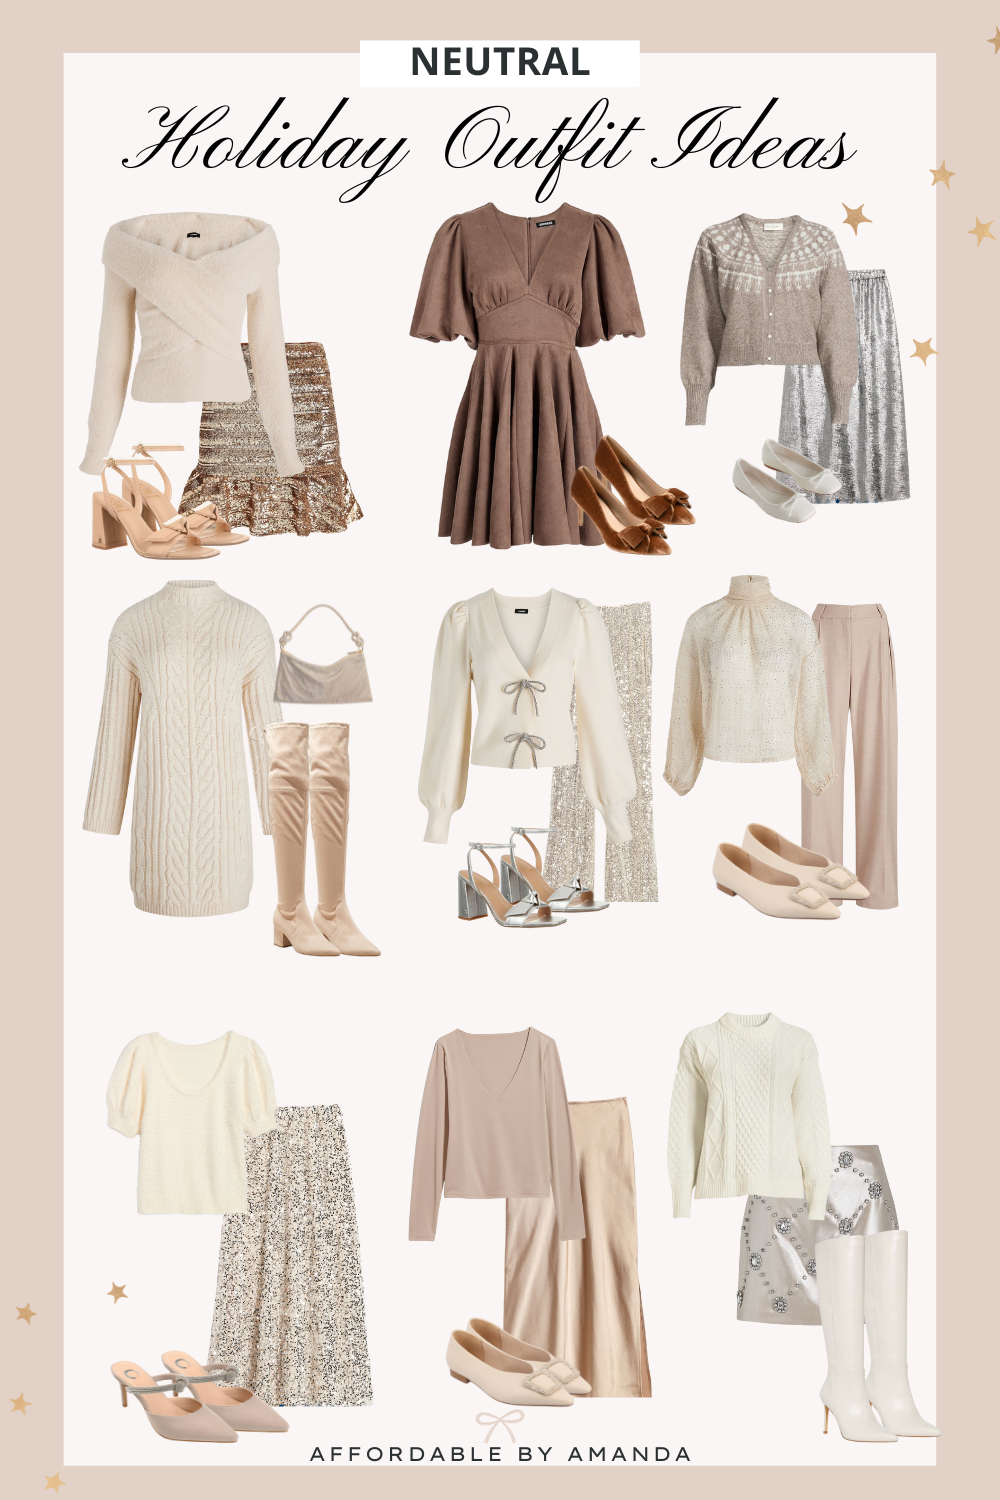 Neutral Holiday Outfits 2023 - Affordable by Amanda shares holiday outfits for women